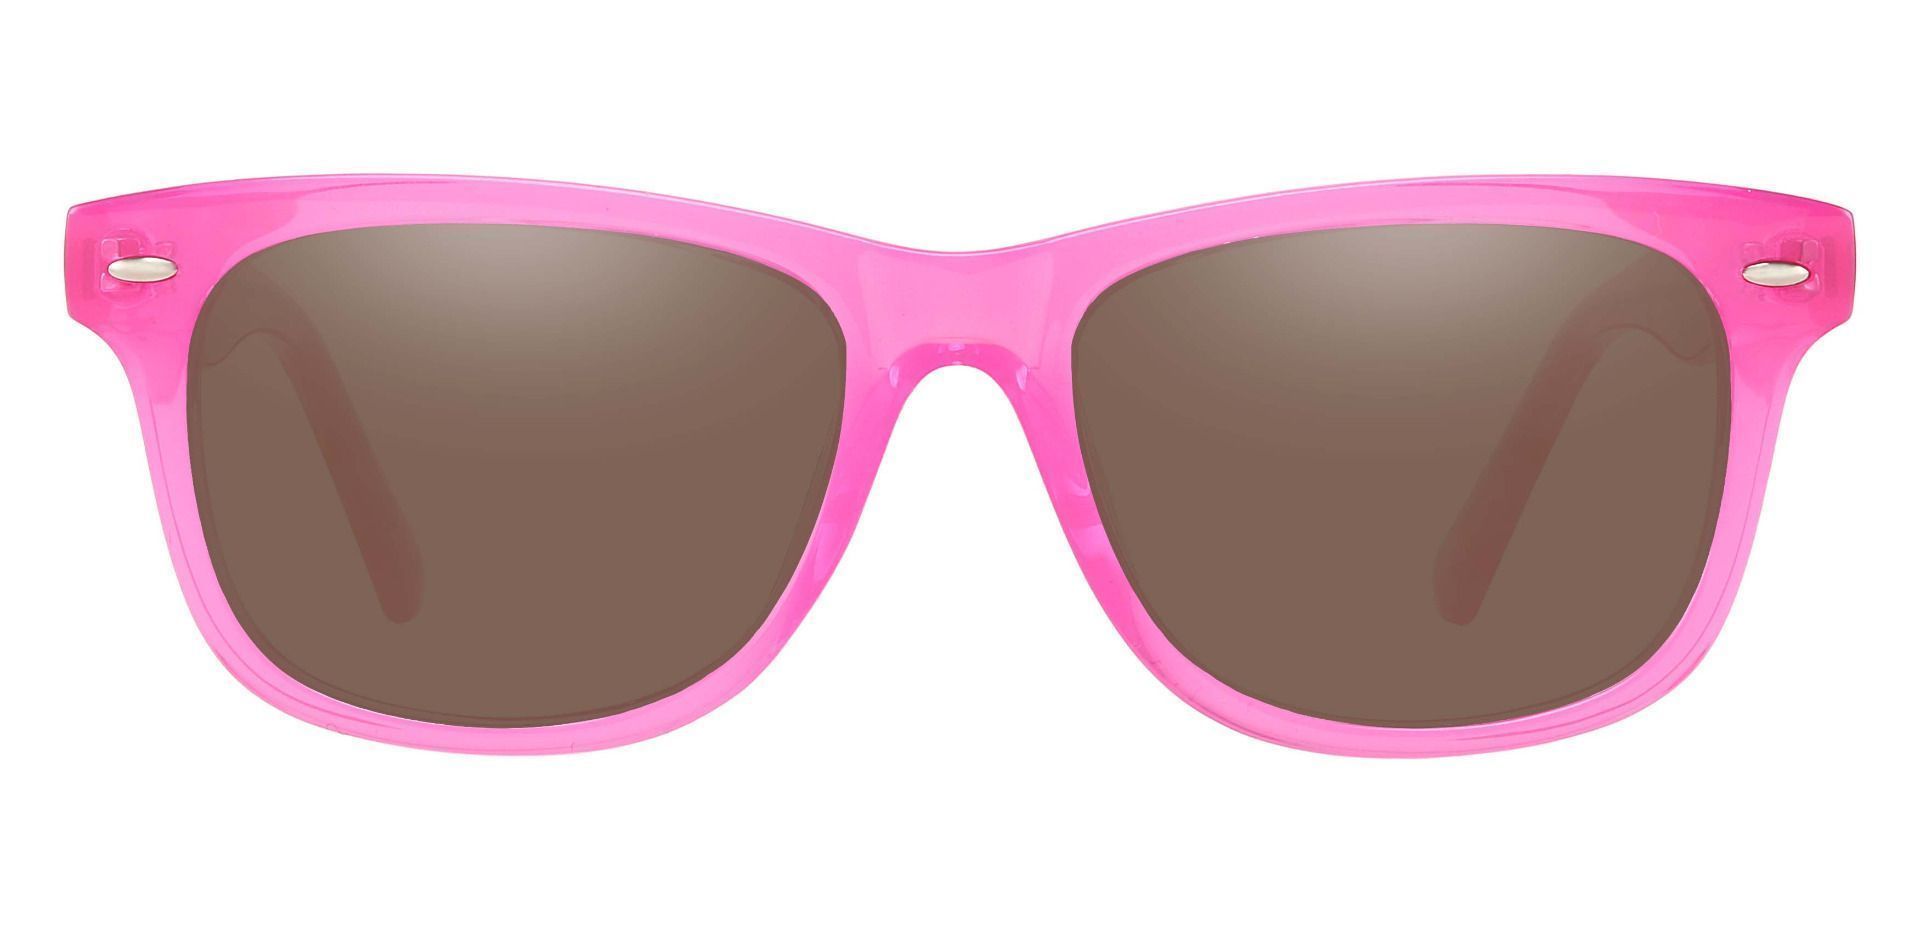 Eureka Square Lined Bifocal Sunglasses - Pink Frame With Brown Lenses